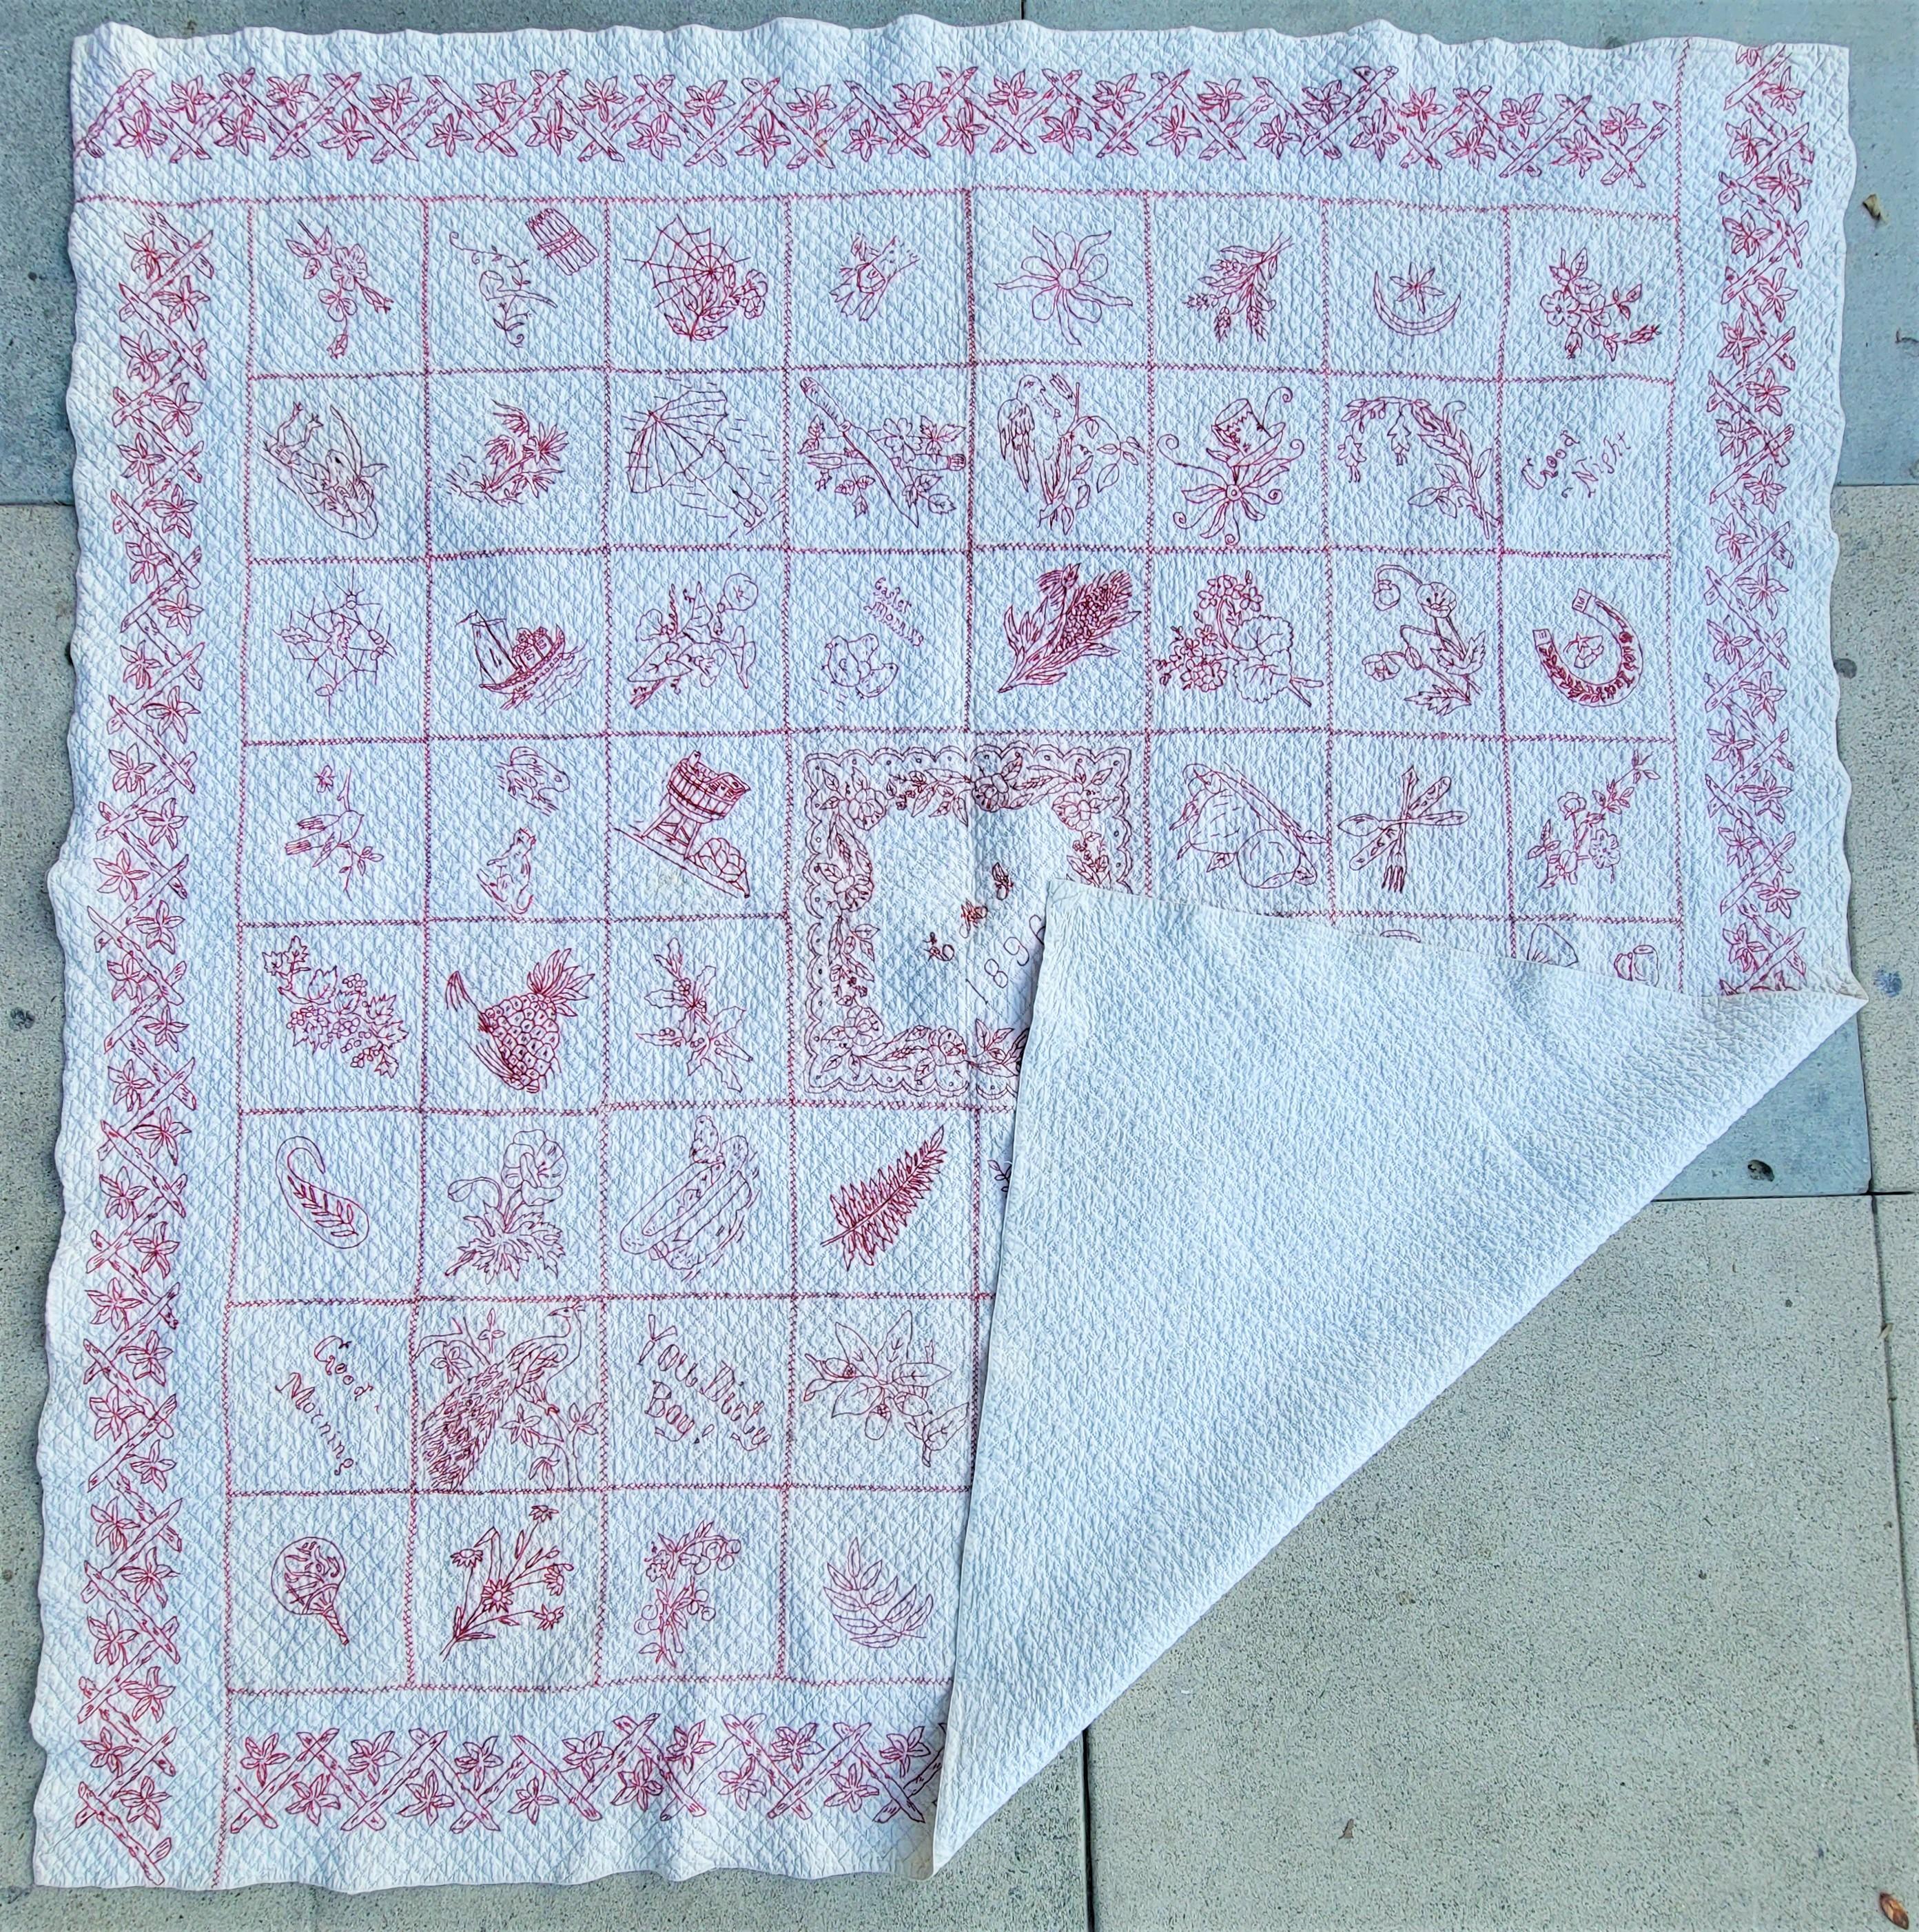 19th Century 19th C Signed & Dated 1898 Embroidered Sampler Quilt For Sale